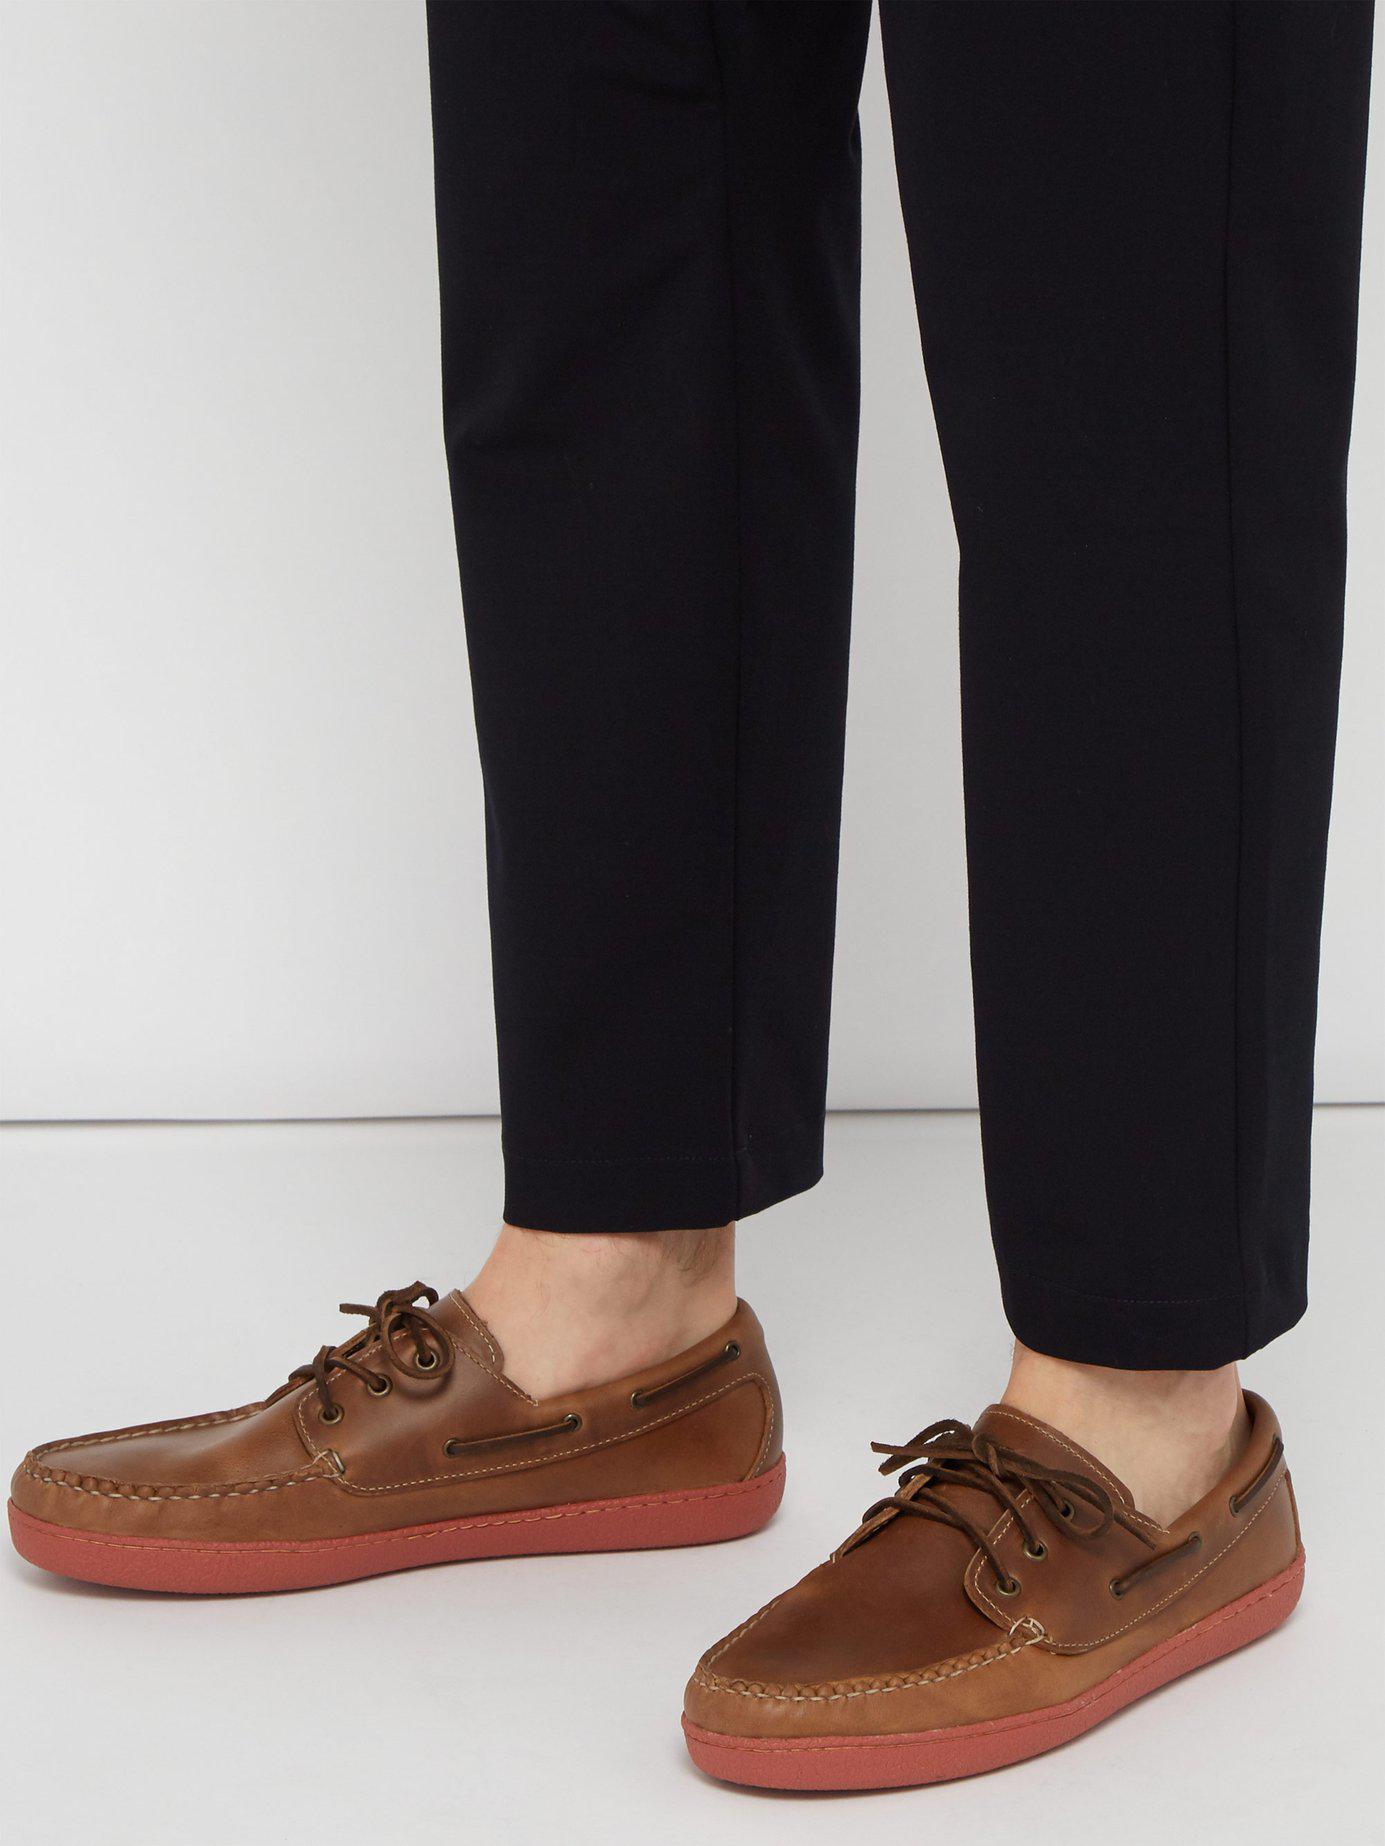 Quoddy Runabout Leather Boat Shoes in 